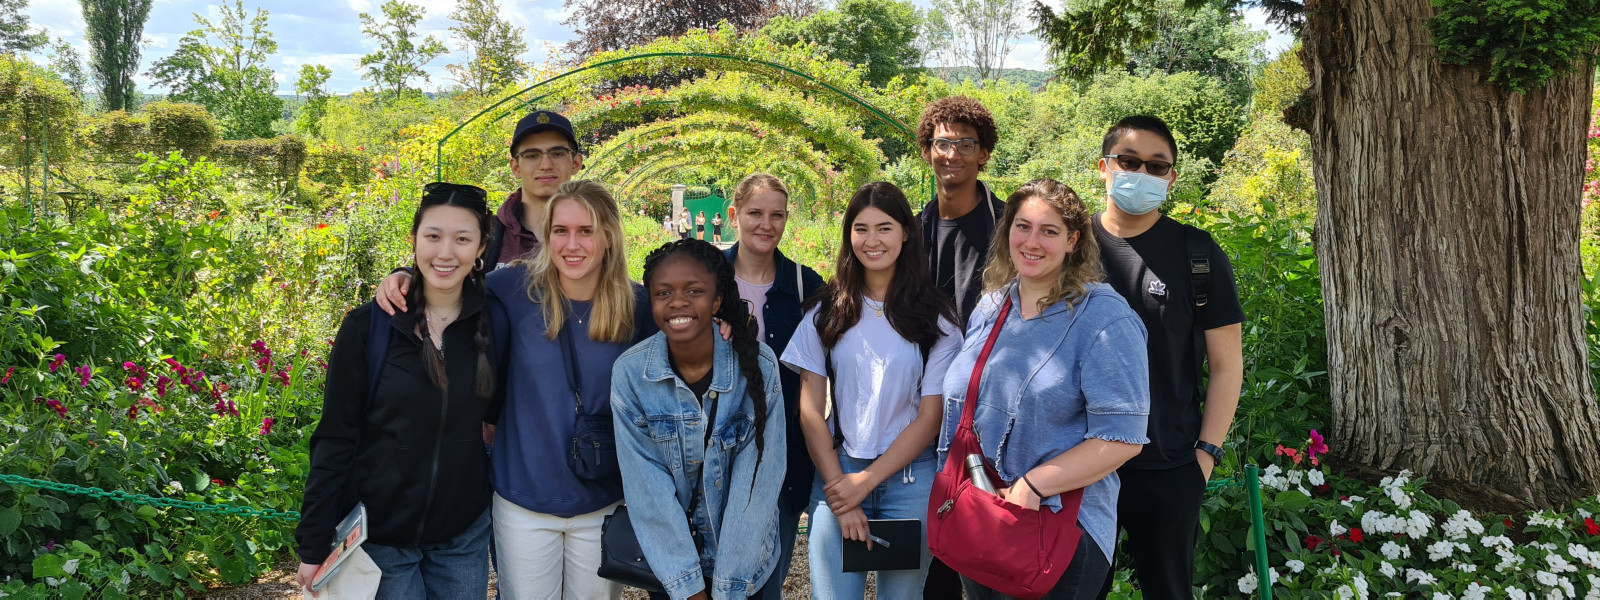 Nine students pose for a photo in the garden.